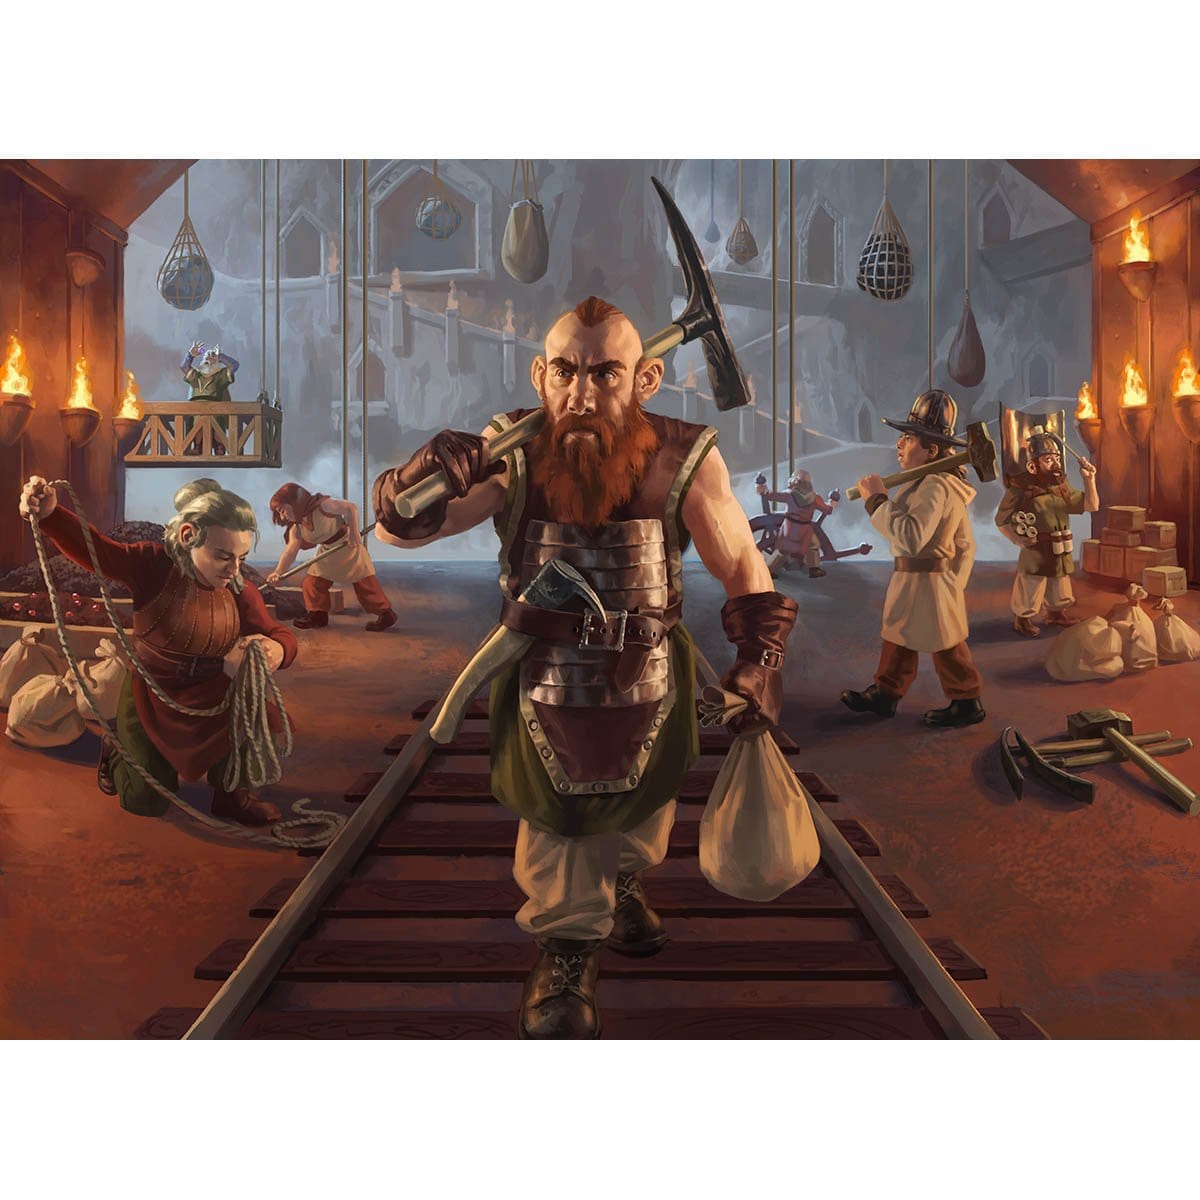 Seven Dwarves Print - Print - Original Magic Art - Accessories for Magic the Gathering and other card games